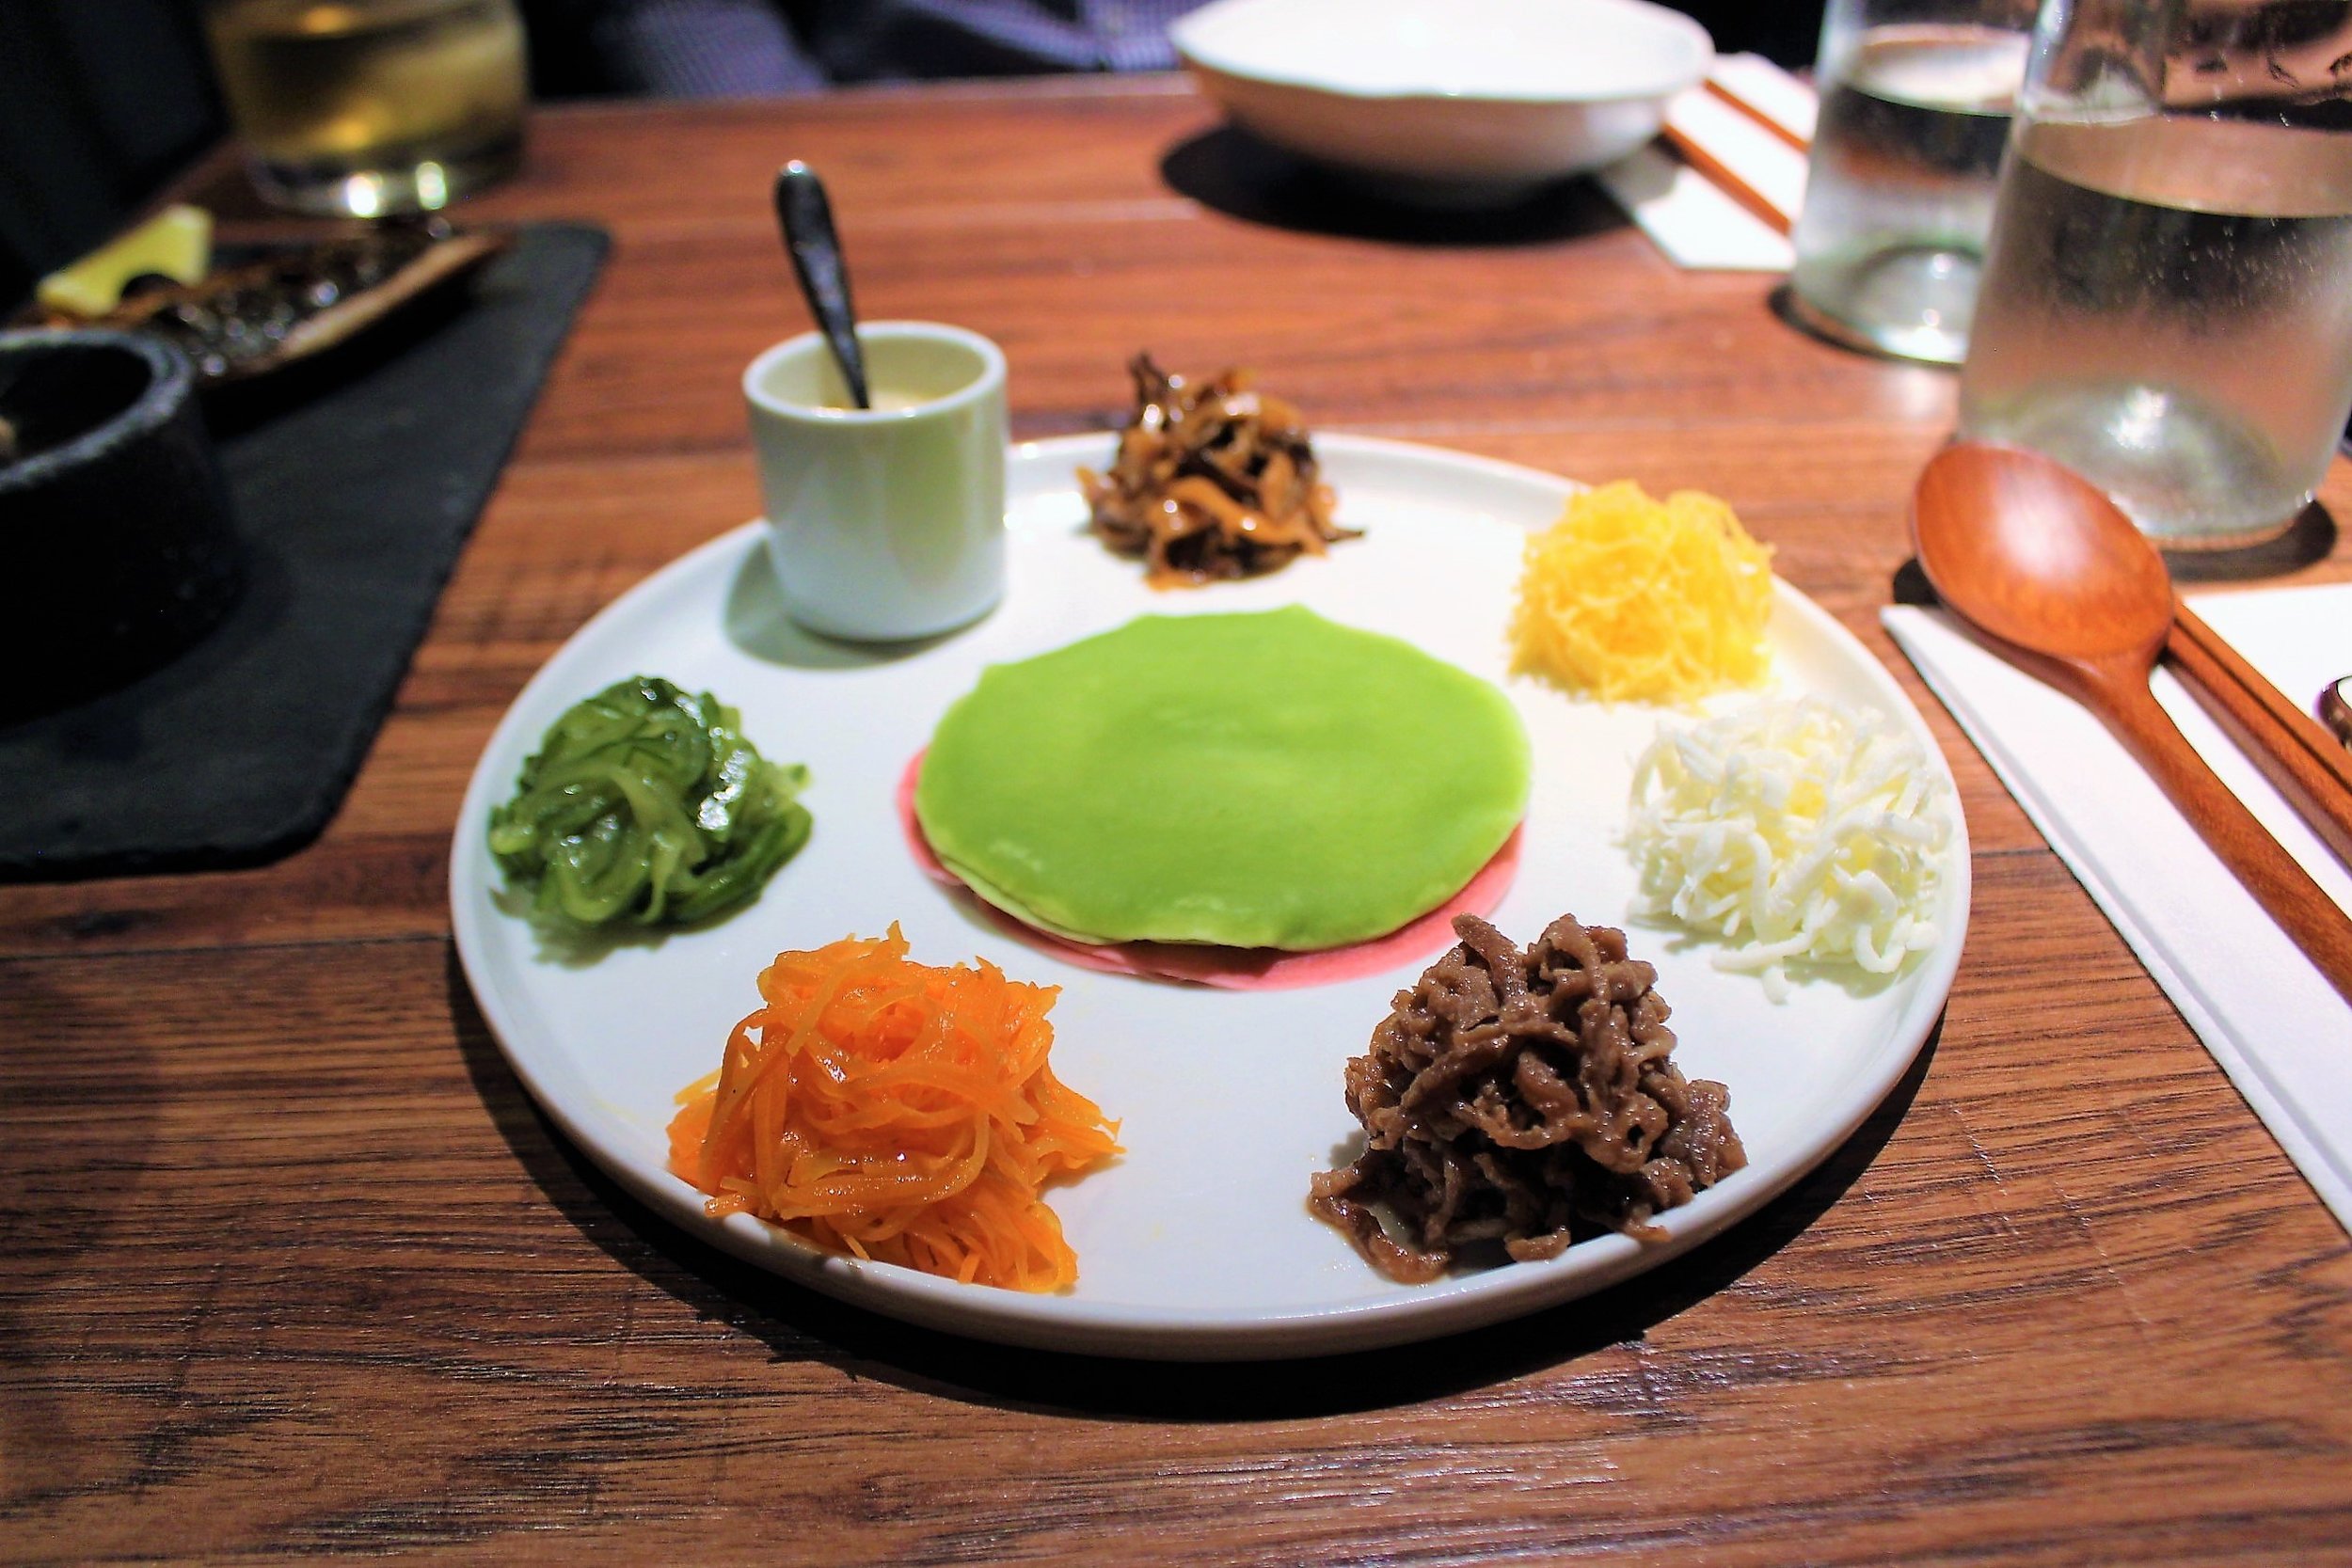 "Chil-jeol-pan" Seven Flavors at Oiji in New York City